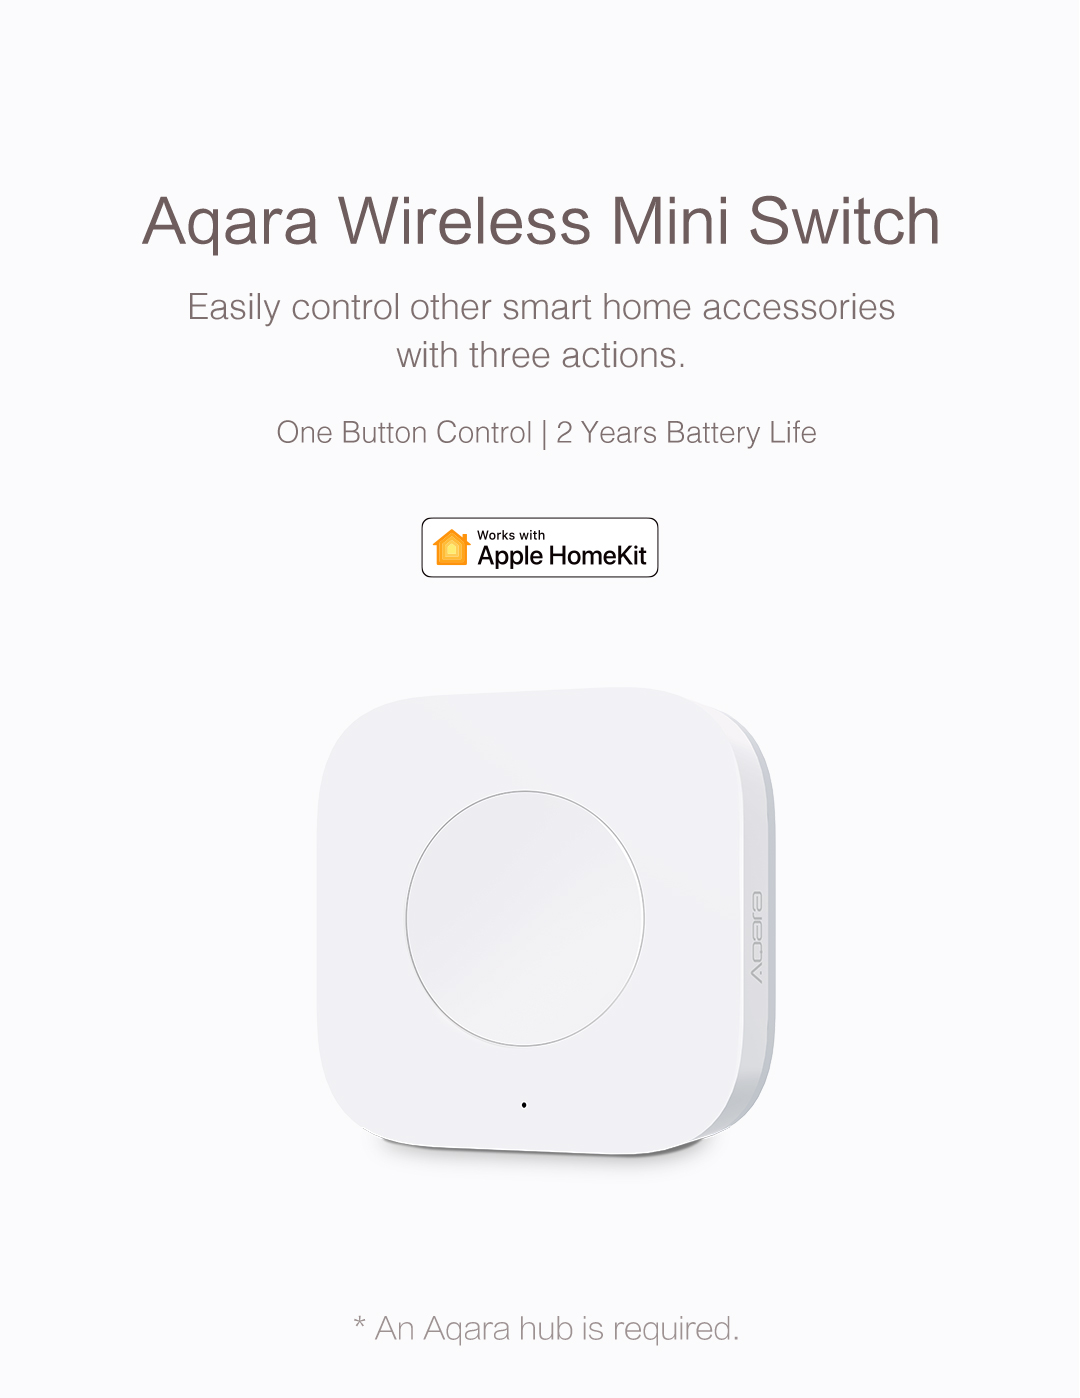 Aqara wireless mini switch - Easily control other smart home accessories with three actions